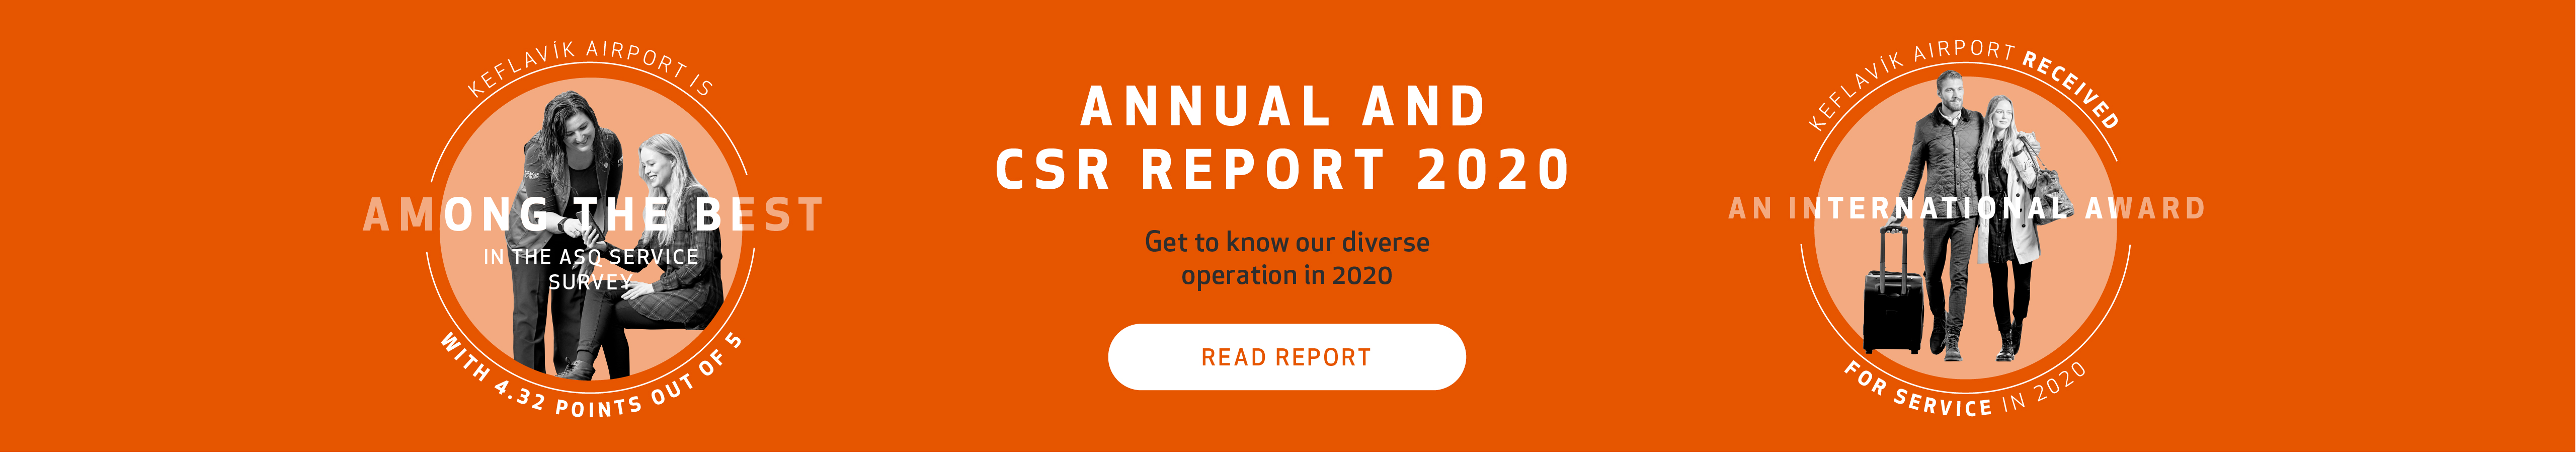 Isavia - Annual and CSR Report 2020